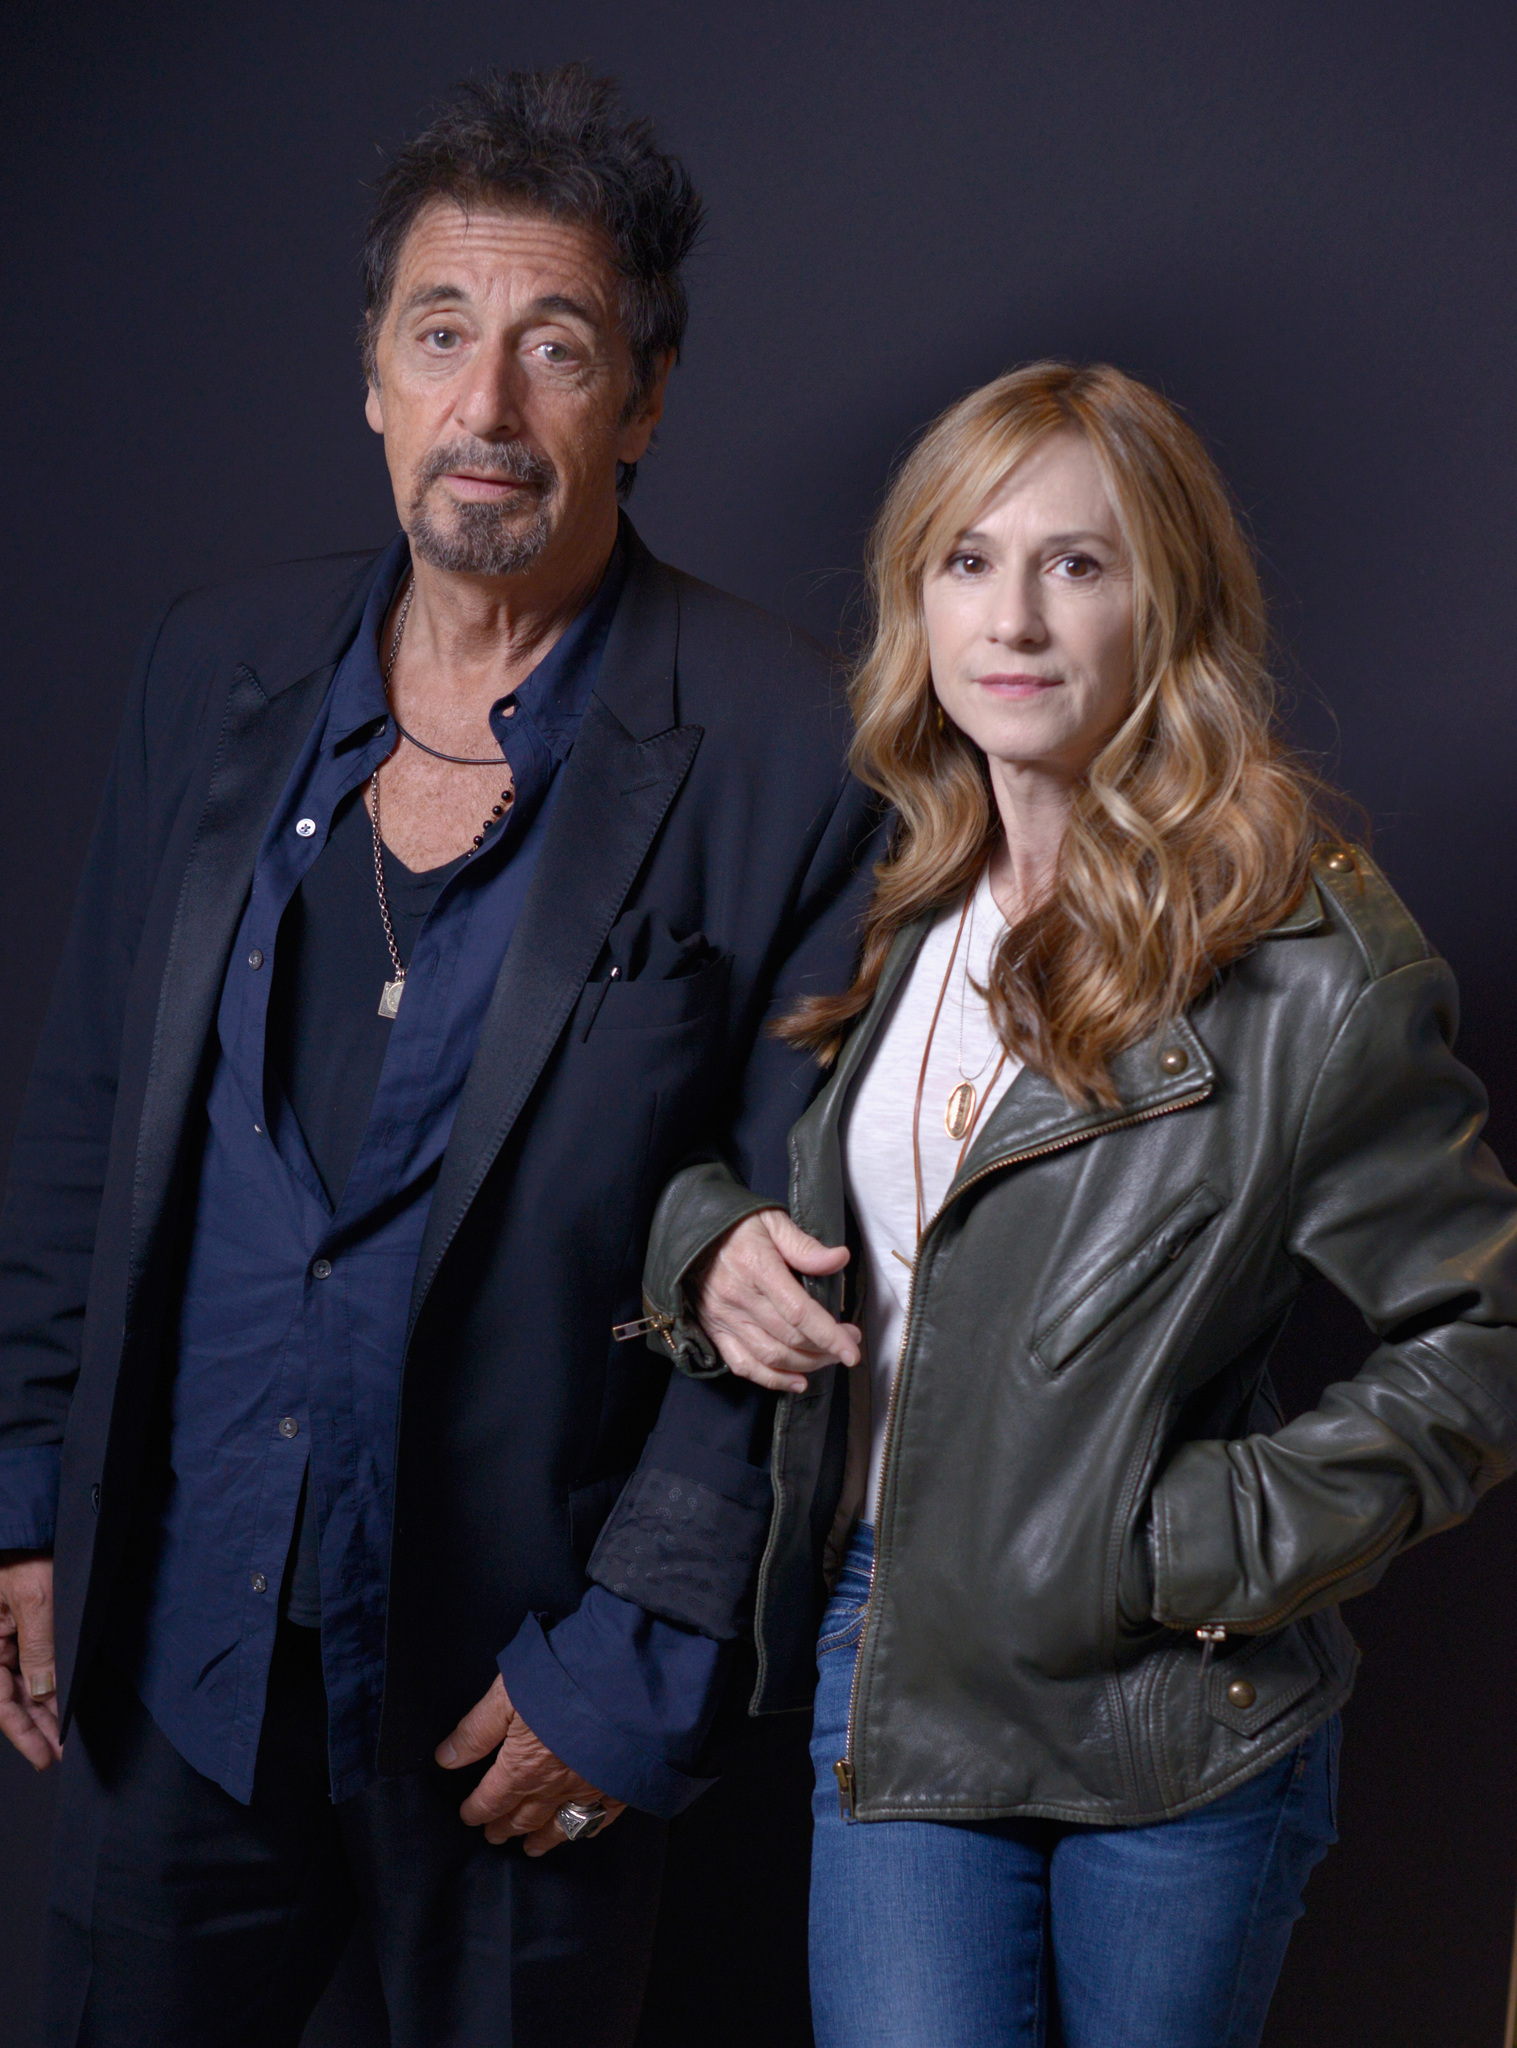 Al Pacino and Holly Hunter at event of Manglehorn (2014)